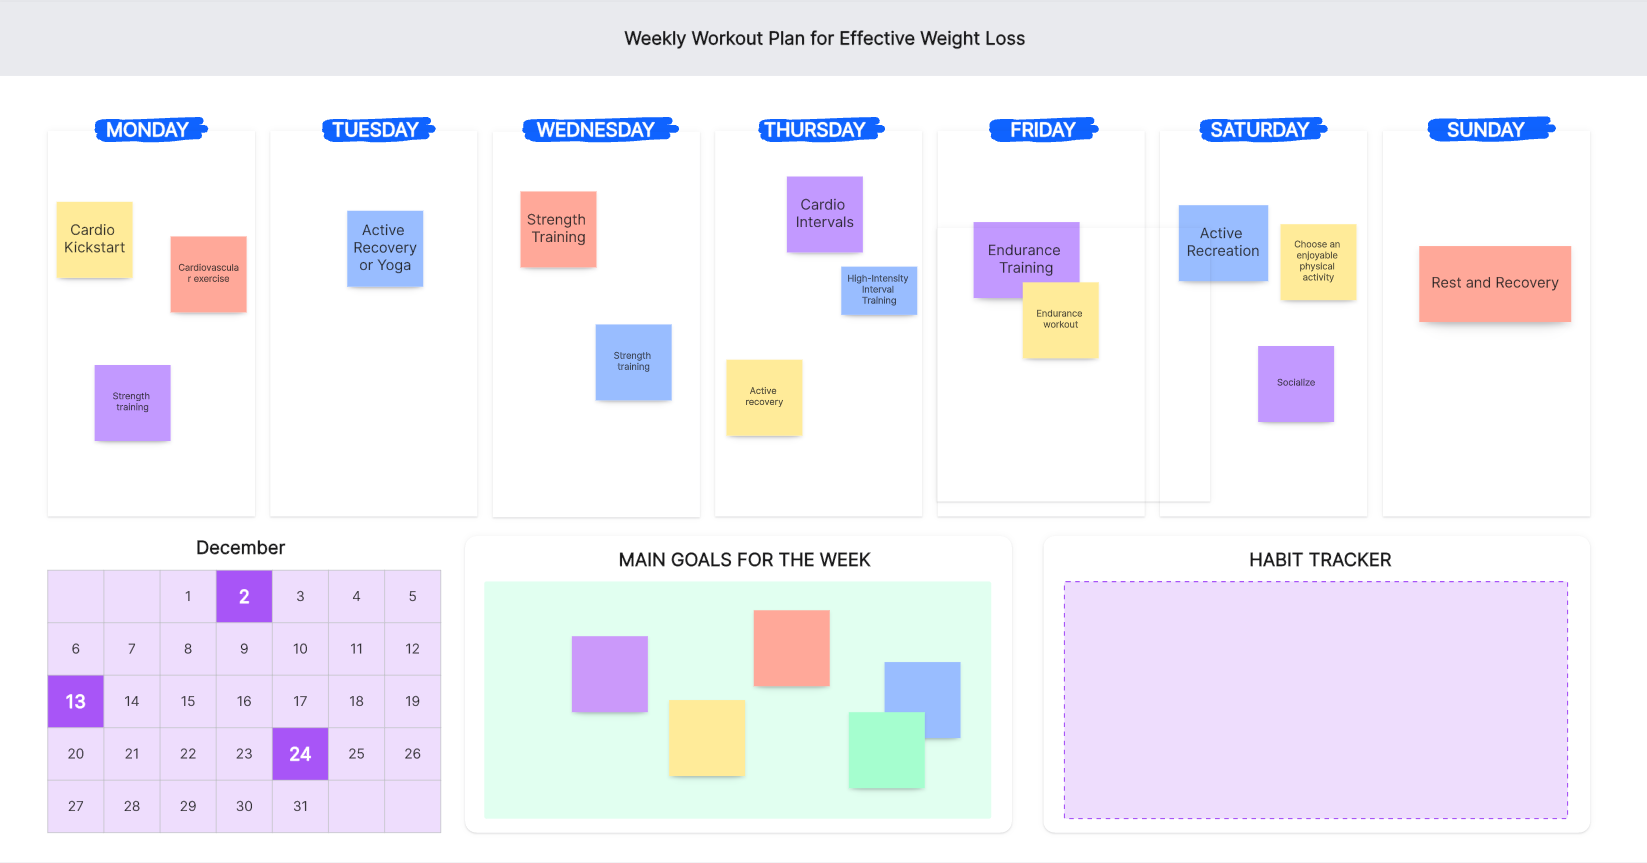 A Comprehensive Weekly Workout Plan for Effective Weight Loss